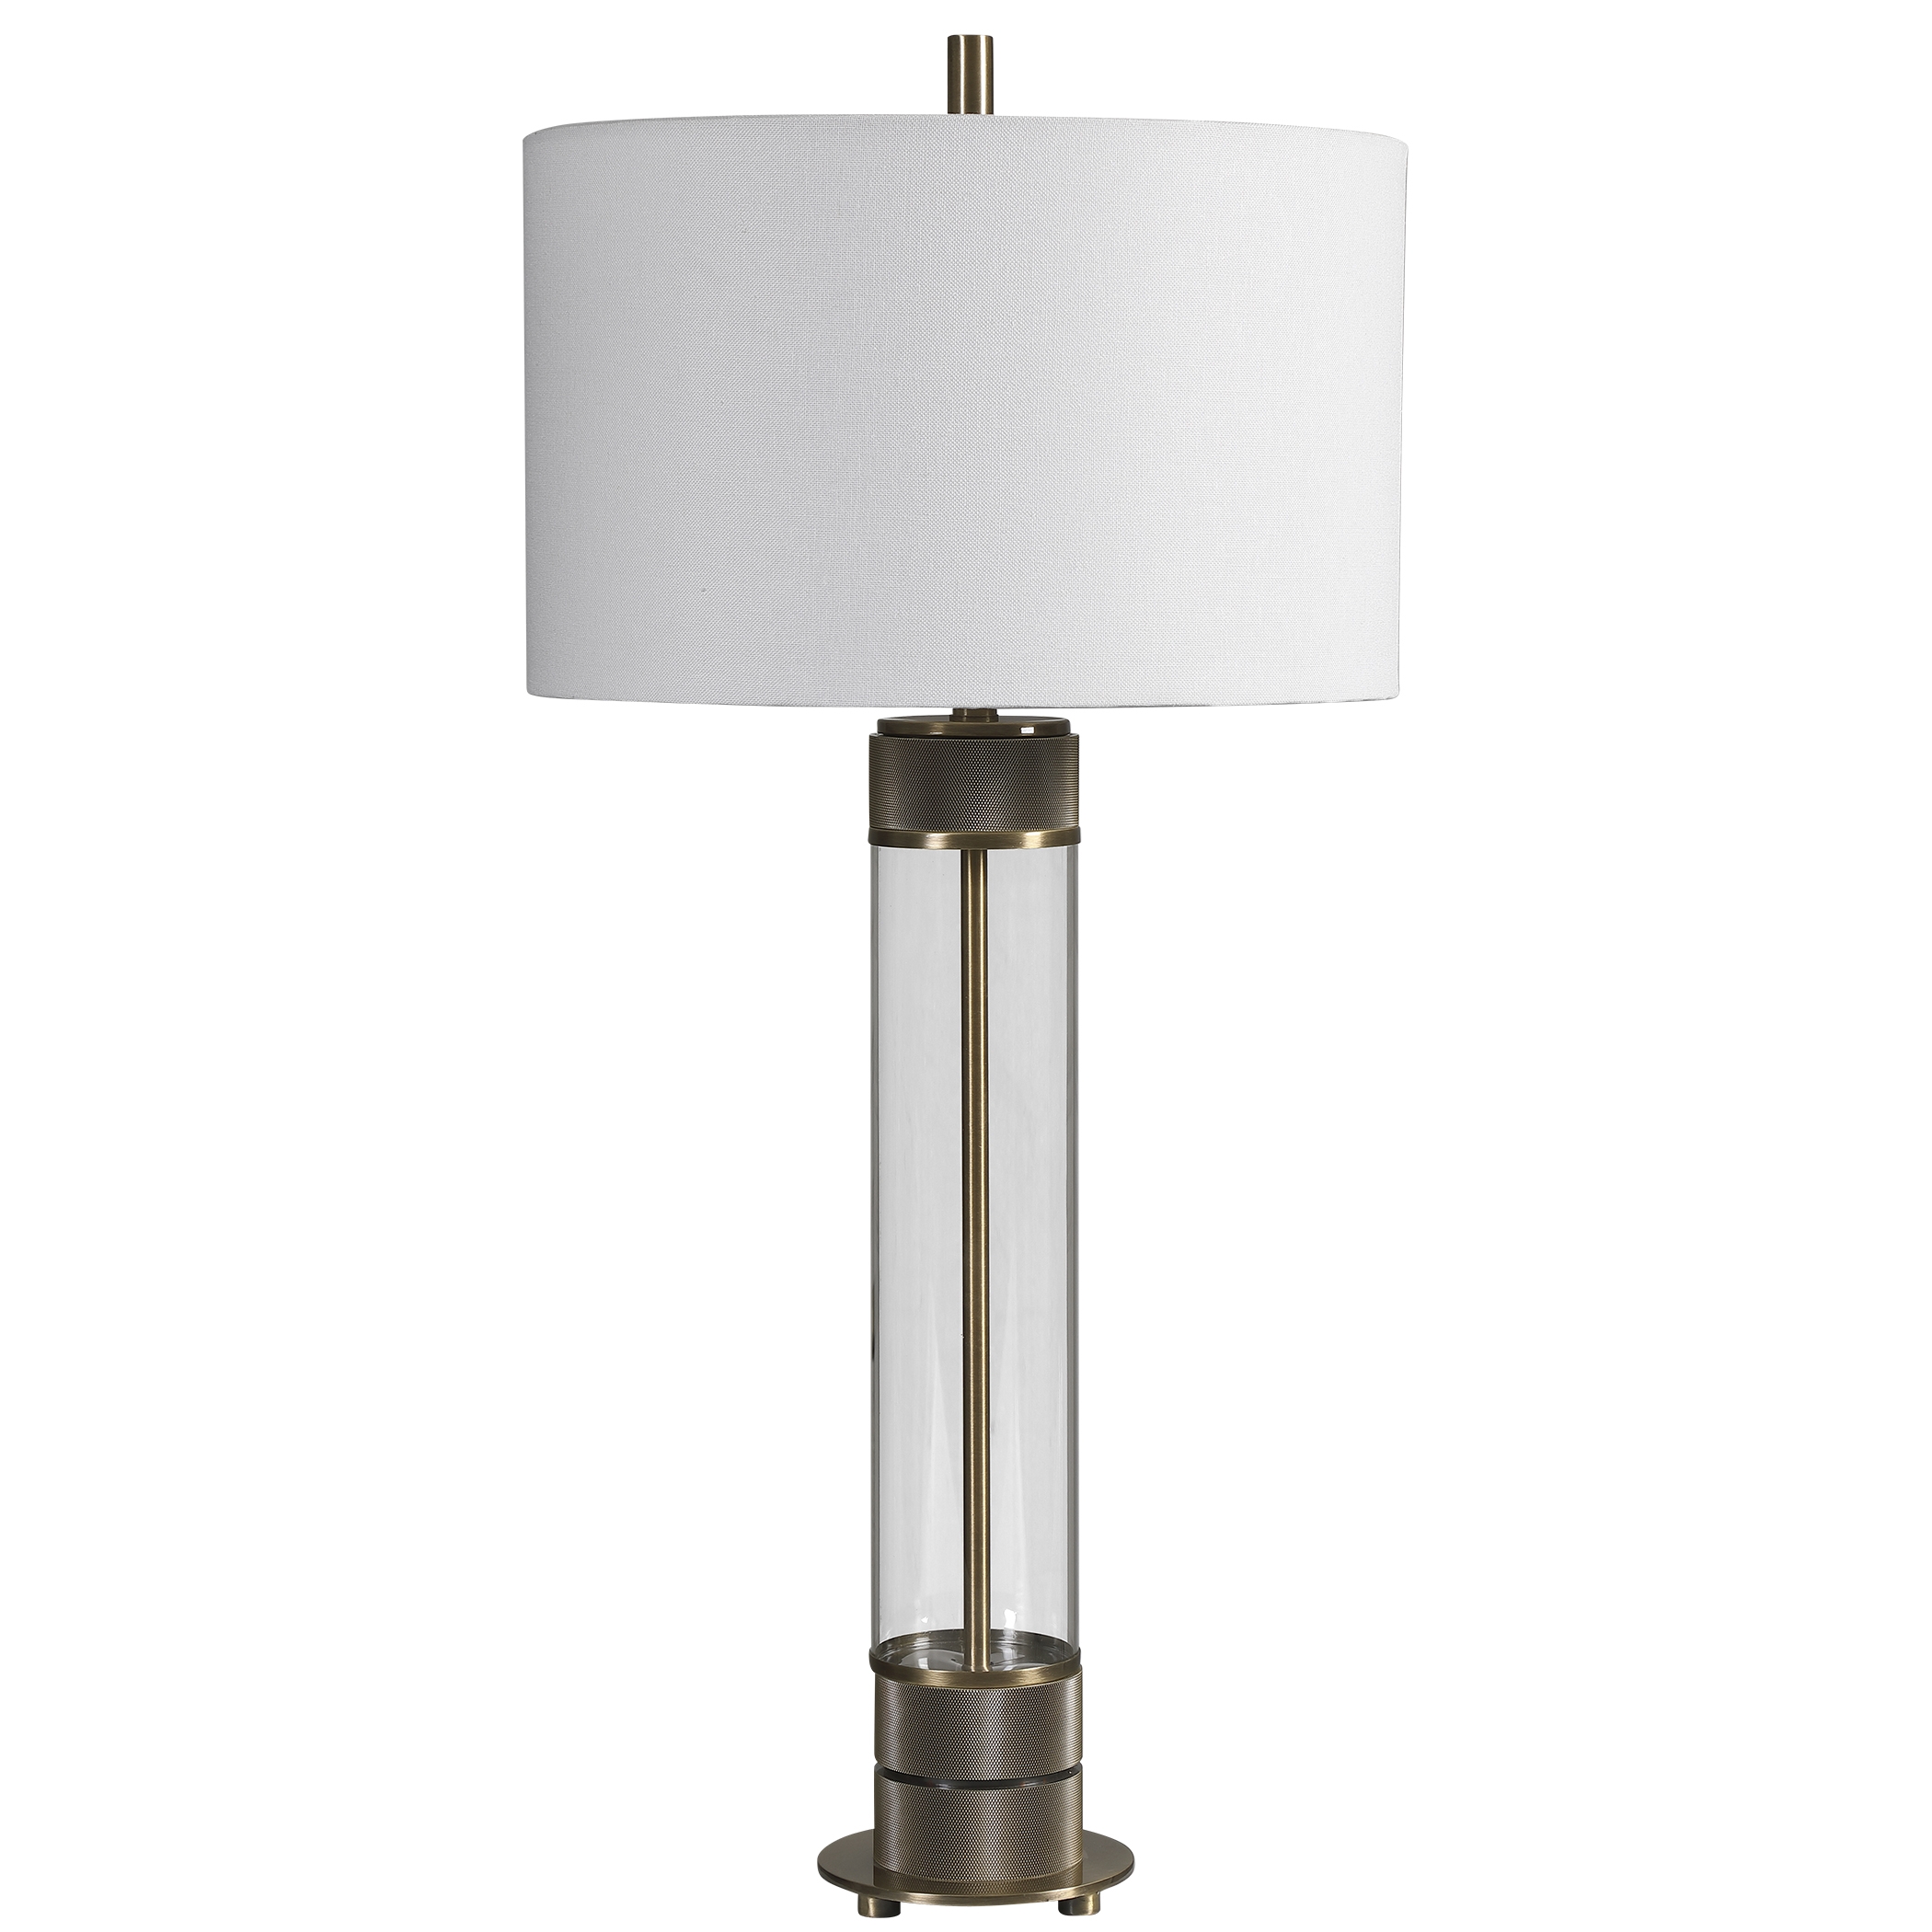 Anmer Industrial Table Lamp - Image 2